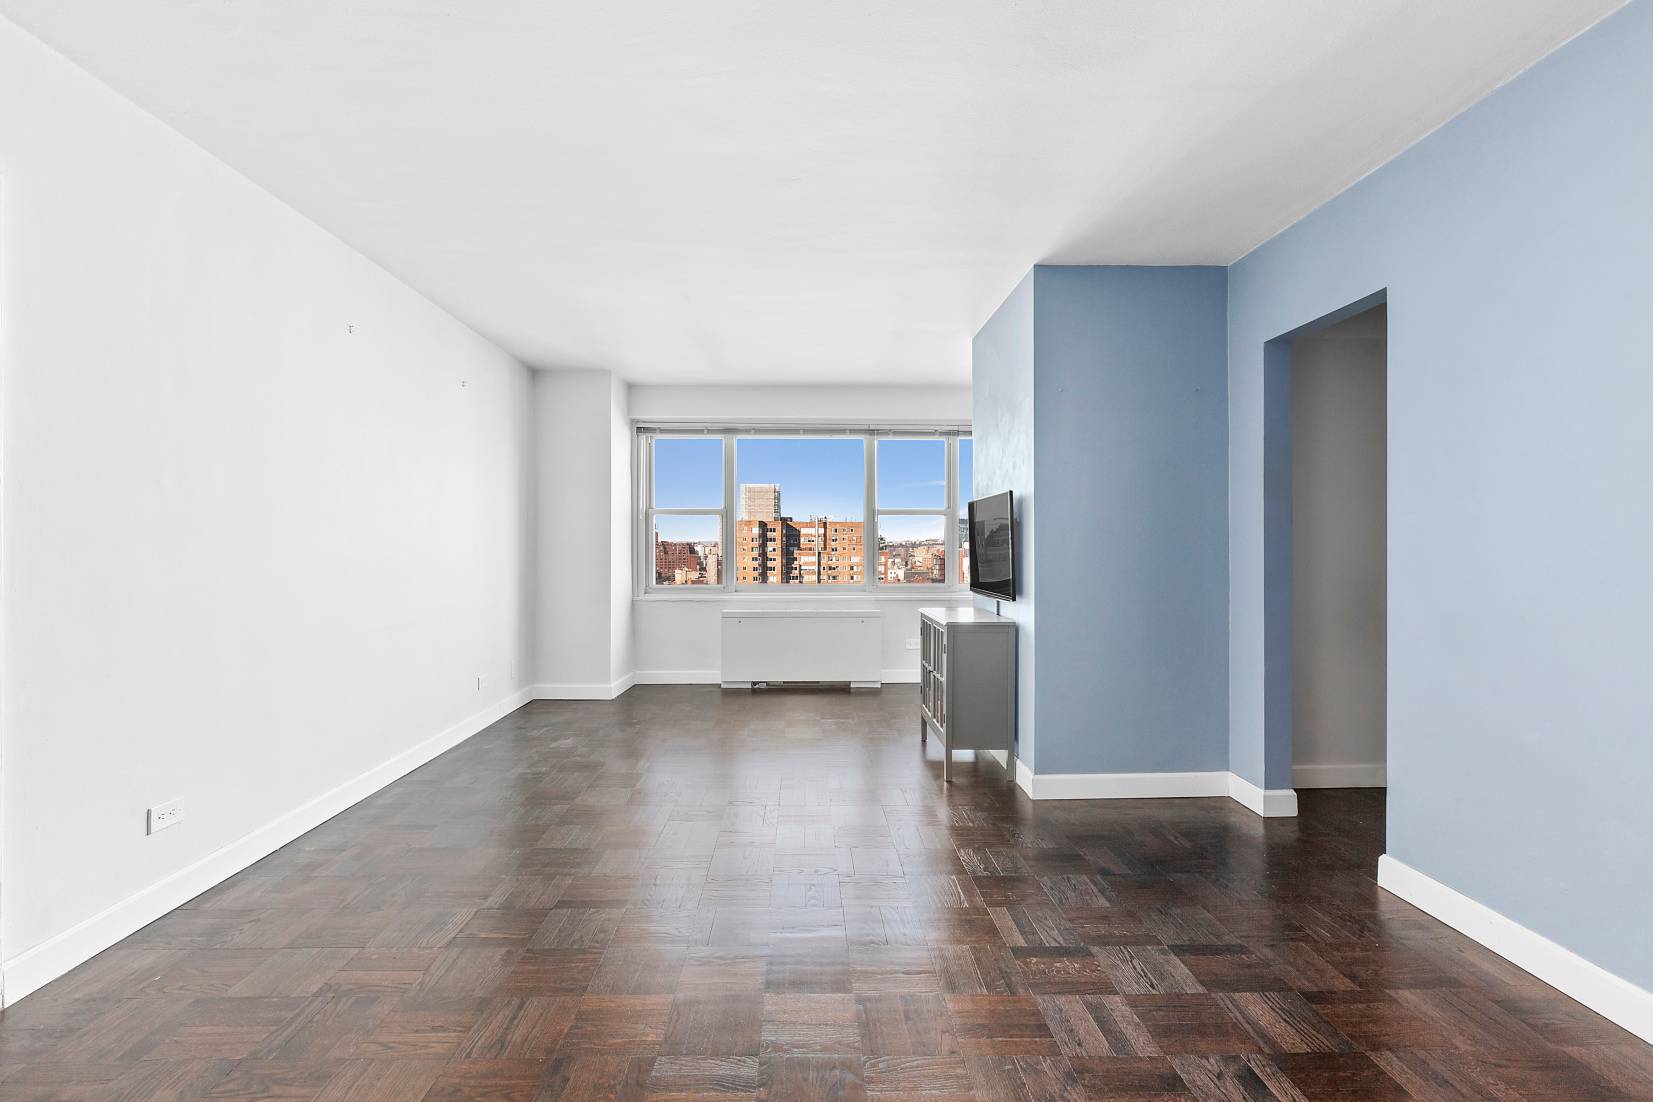 Take in the breathtaking views of this 19th Floor Alcove Studio at the stately John Adams Cooperative.